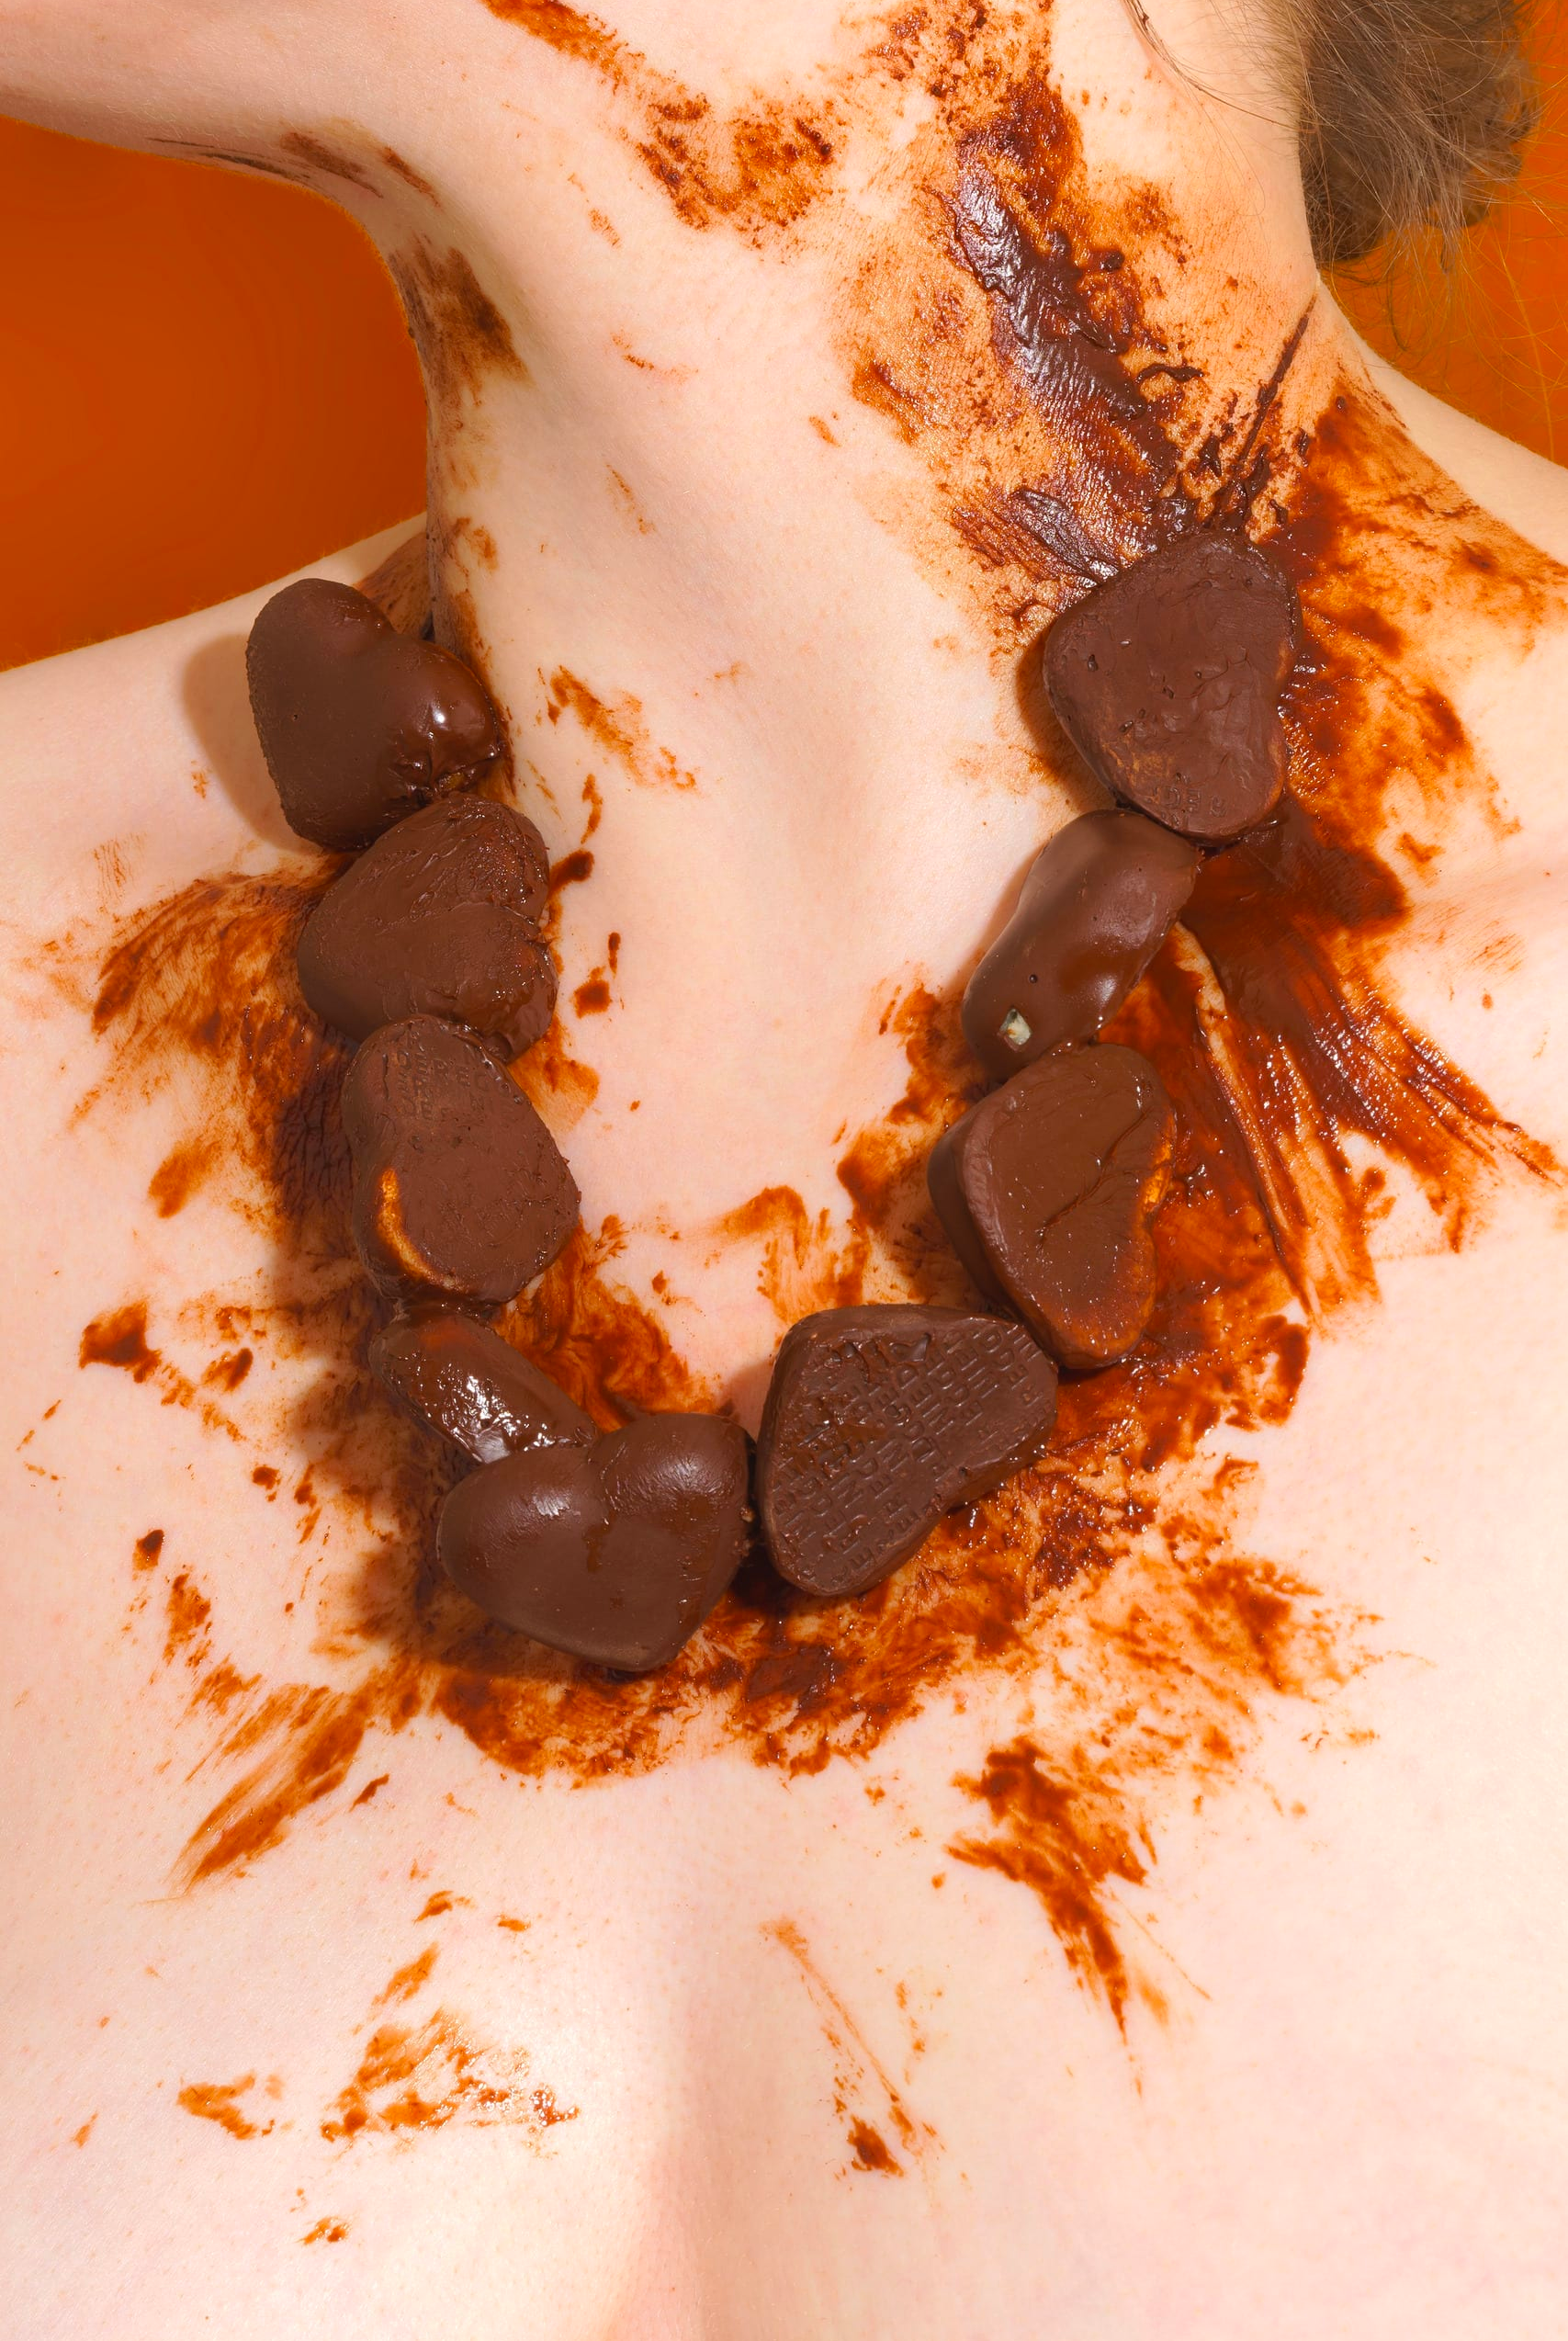 A close-up photograph of a bare neck, wearing a chain of melted chocolates like a necklace, with chocolate smeared over the upper chest and neck, by Francesca Hummler.